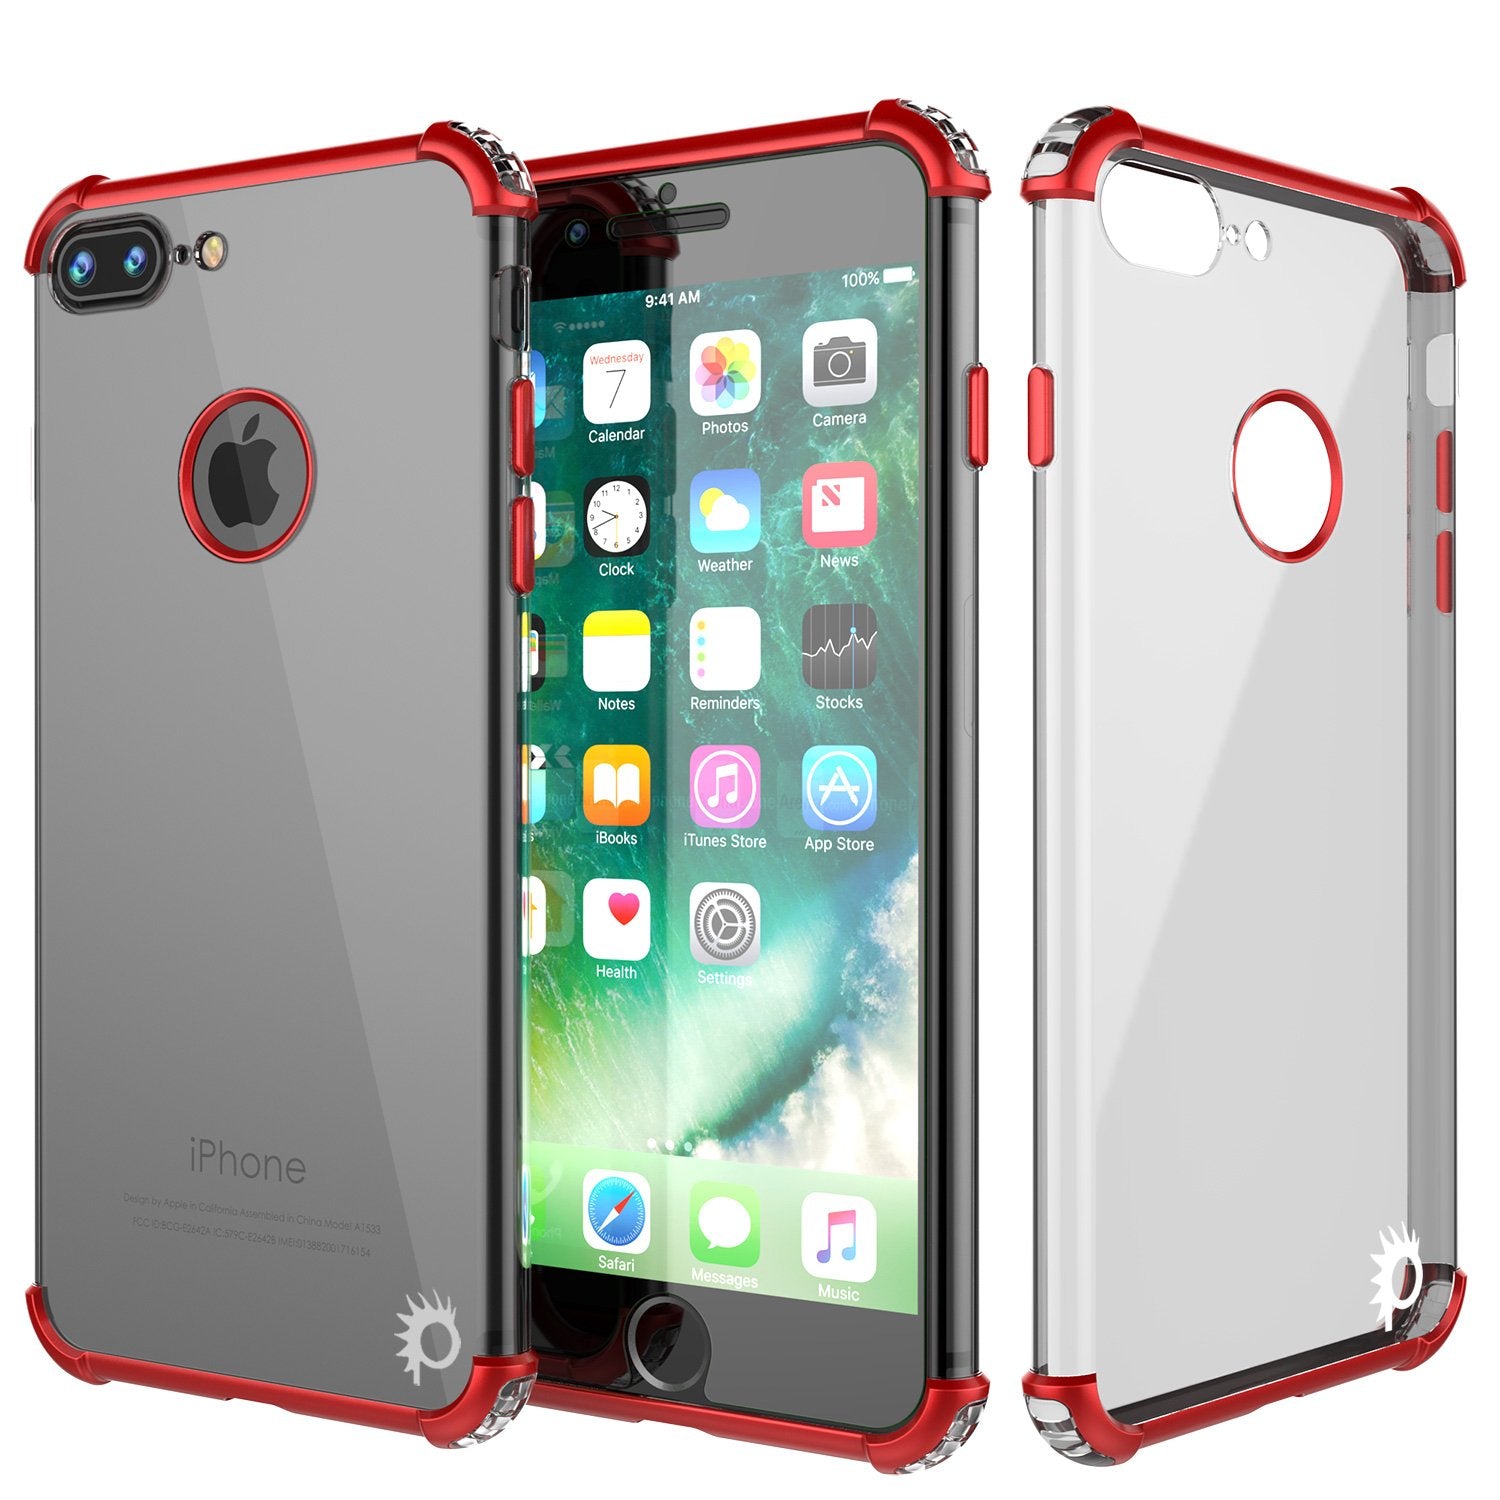 iPhone 8 PLUS Case, Punkcase [BLAZE SERIES] Protective Cover W/ PunkShield Screen Protector [Shockproof] [Slim Fit] for Apple iPhone 7/8/6/6s PLUS [Red]